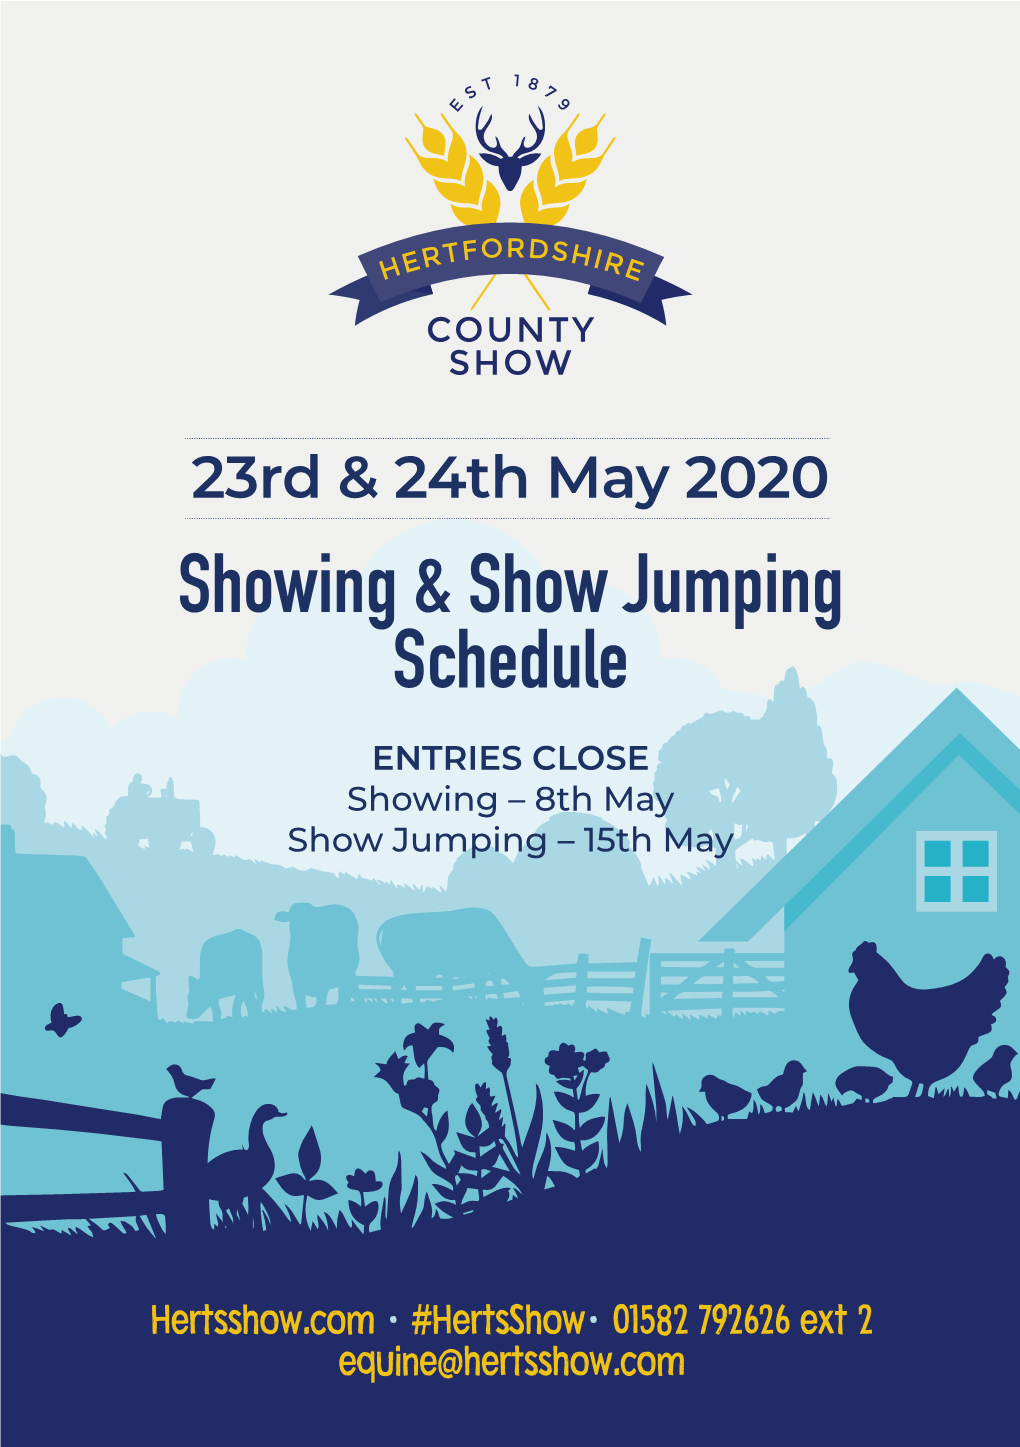 Showing & Show Jumping Schedule